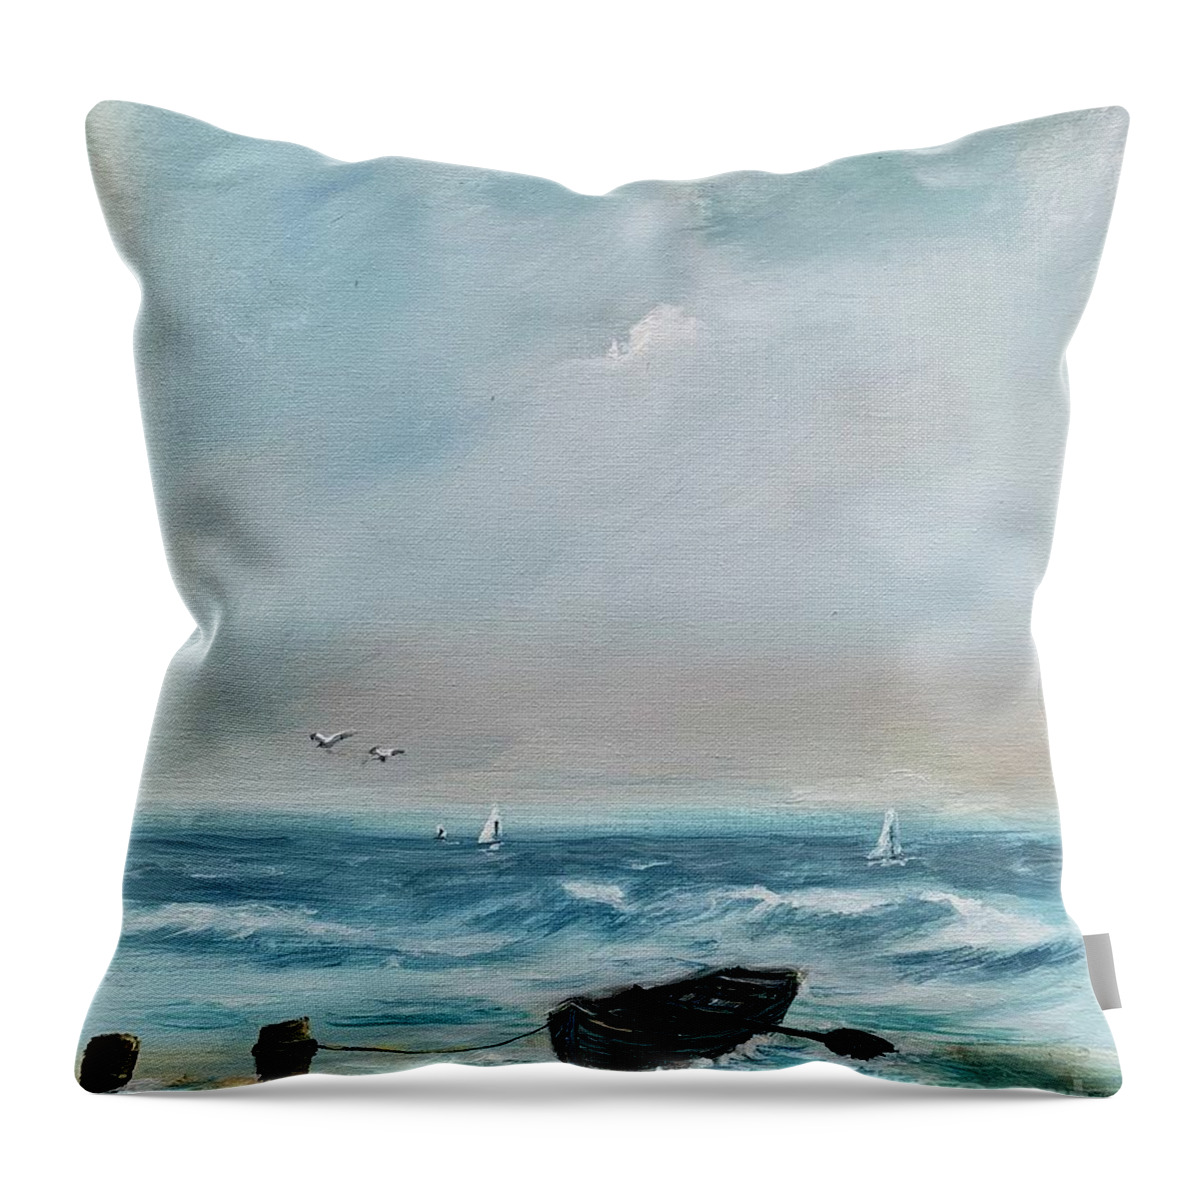 Resting Boat Lonely Boat Rest Wooden Boat Oar Moor Wave Ocean Seascape Blue Acrylic Painting Miroslaw Chelchowski Print Seagull Sailing Clouds Sky Ocean Shore Sand Throw Pillow featuring the painting Resting Boat by Miroslaw Chelchowski